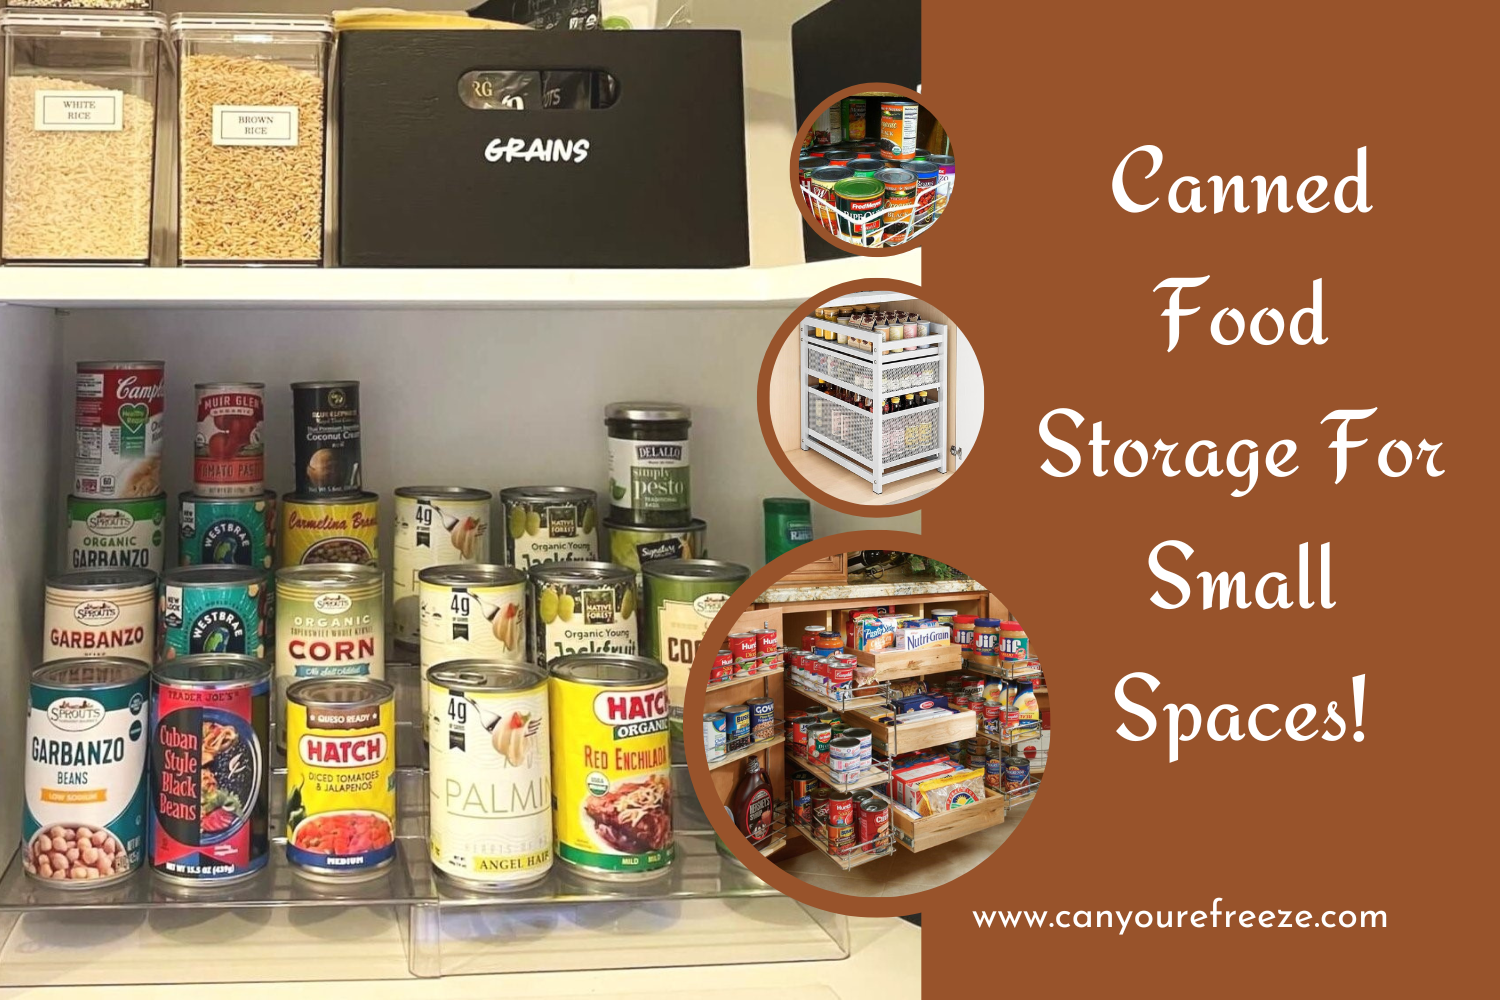 Canned Food Storage For Small Spaces